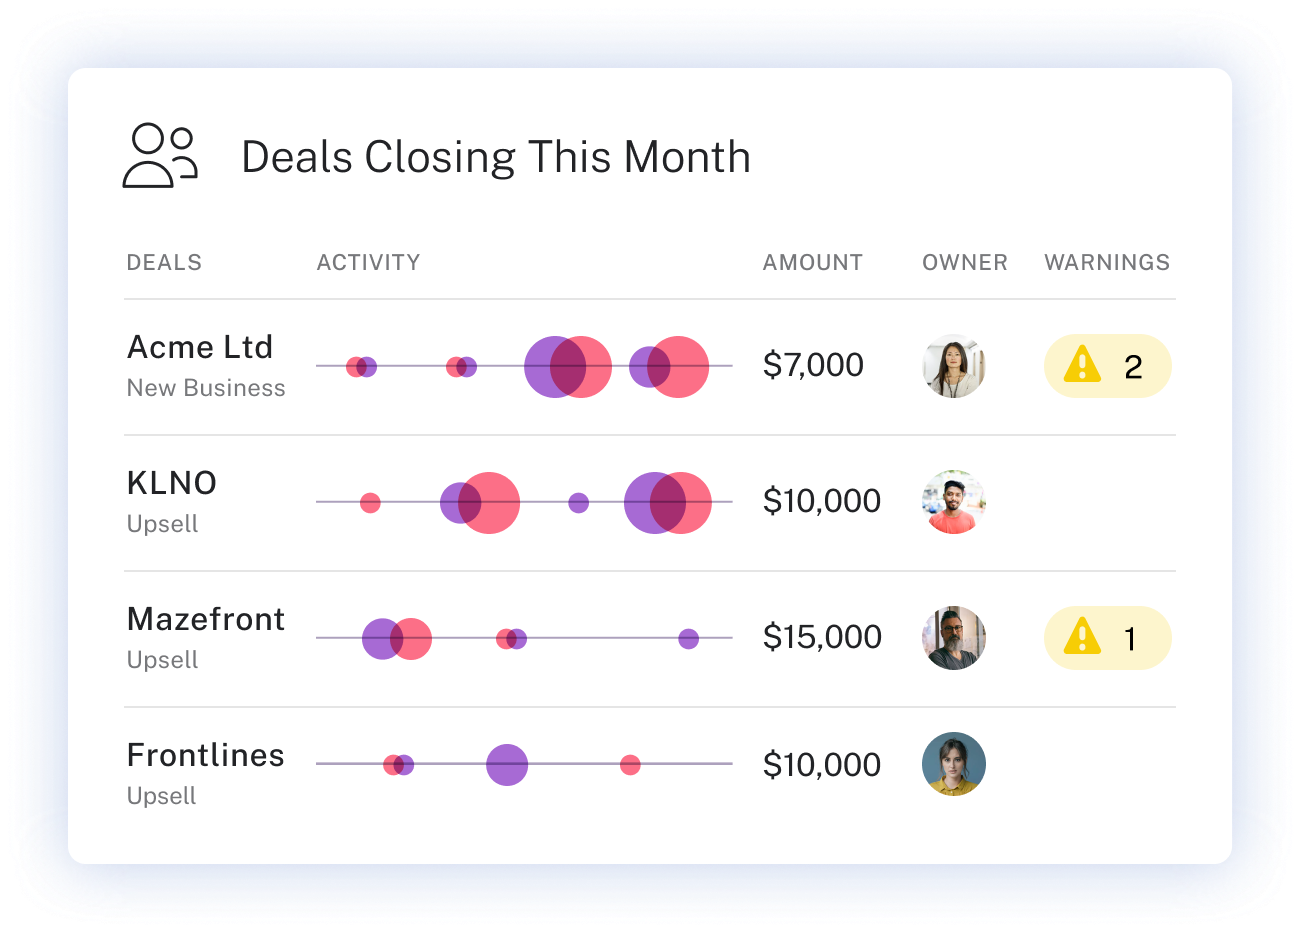 Gong helps you see which deals in your pipeline are real